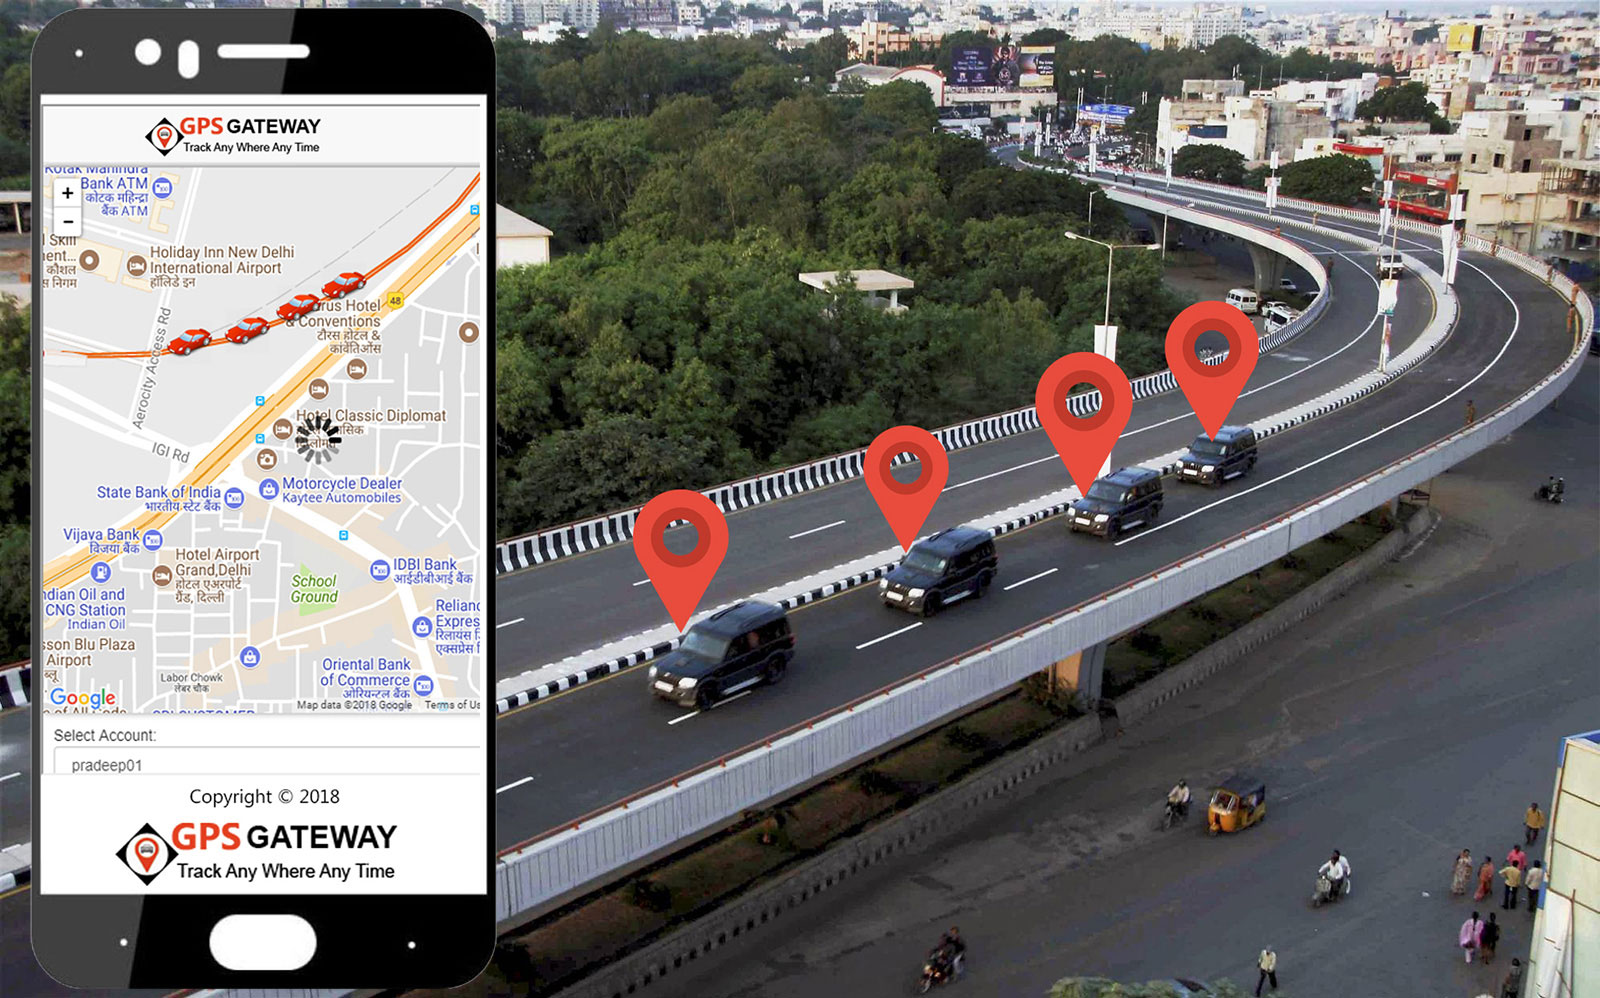 gps tracking system source code, White level GPS Tracking platform, Open source GPS Tracking software, GPS Tracking Software,  Indvehicle tracking software,  fleet tracking software , gps software receiver source code, gps tracking software with open source code